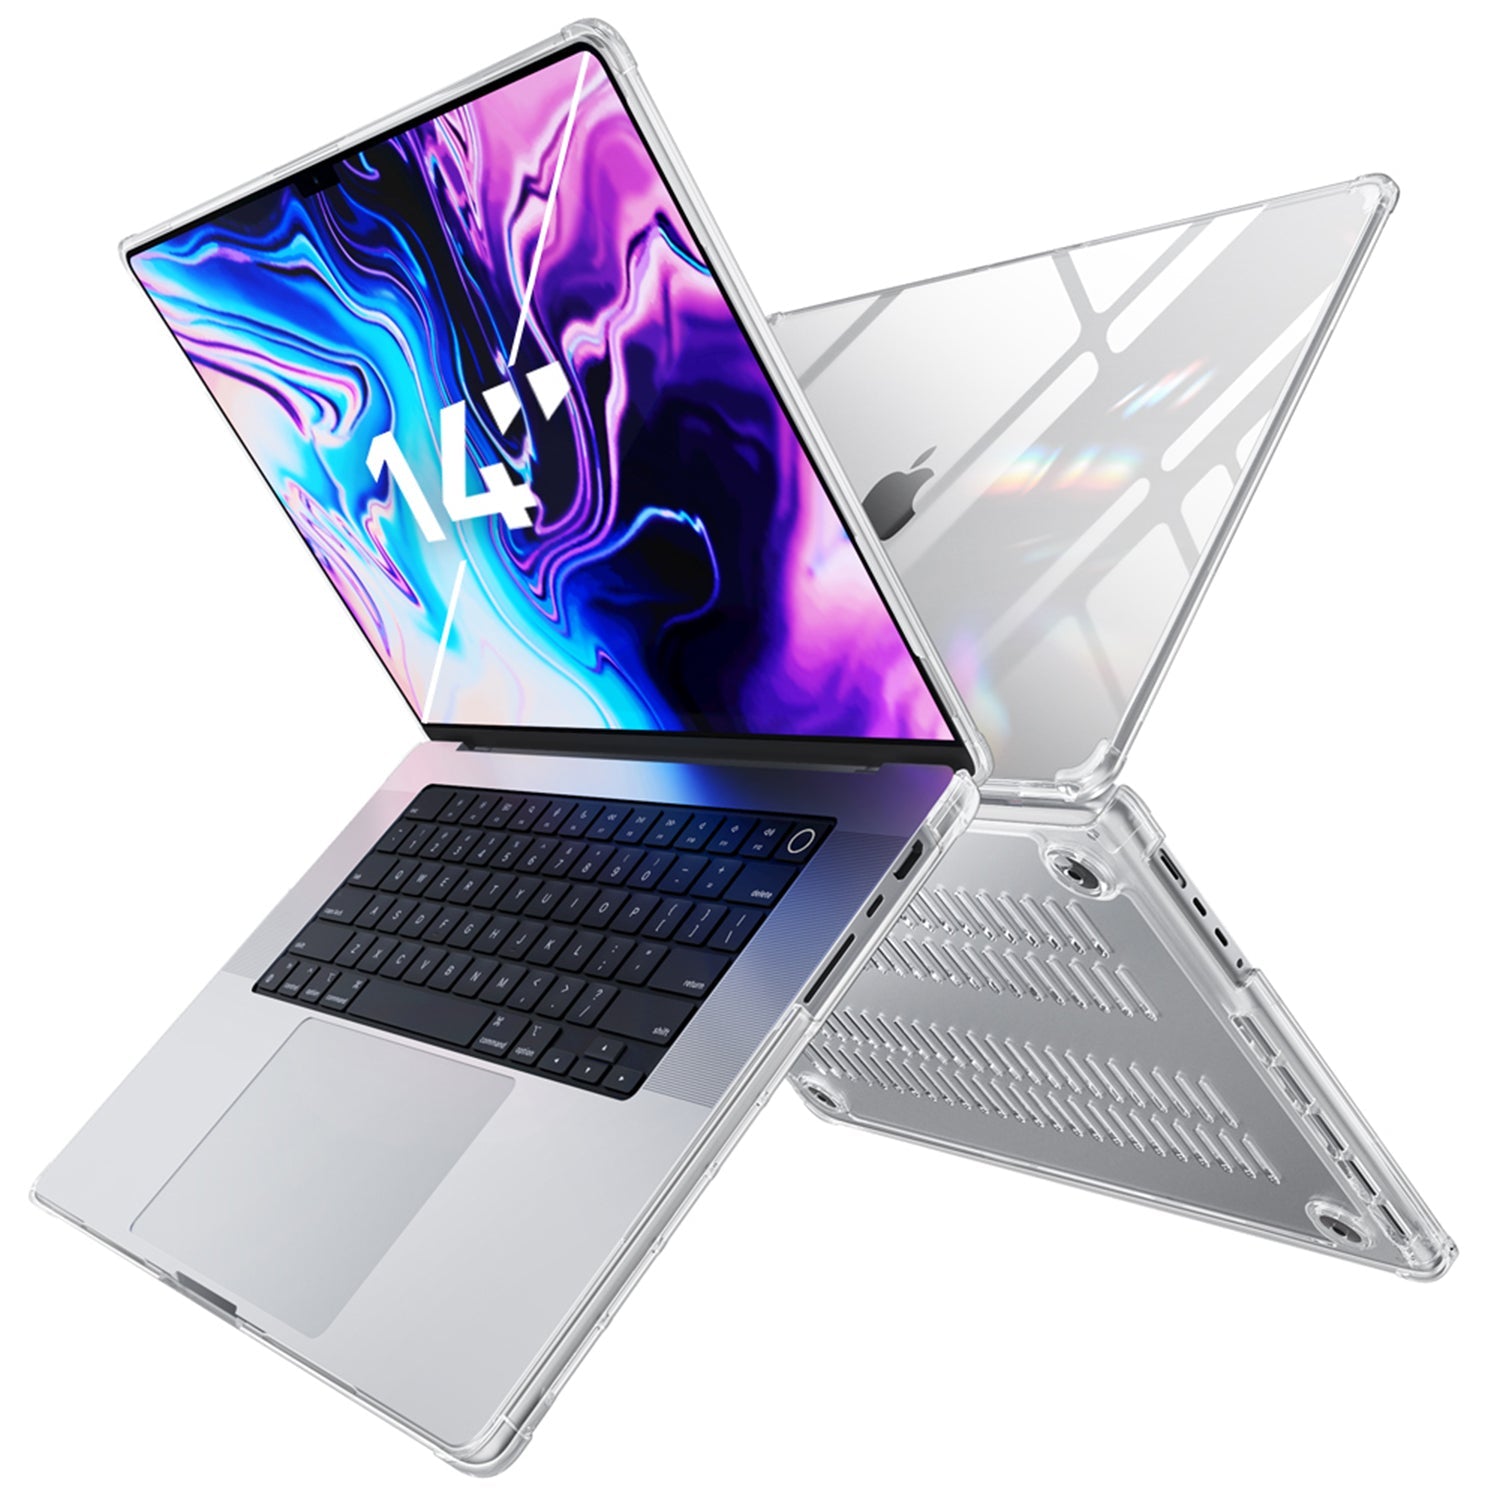 Supcase Unicorn Beetle Clear Series Case Slim Clear Protective Cover Designed for MacBook Pro 14 Inch (2021 Release) A2442 M1 Pro / M1 Max Default Supcase Clear 